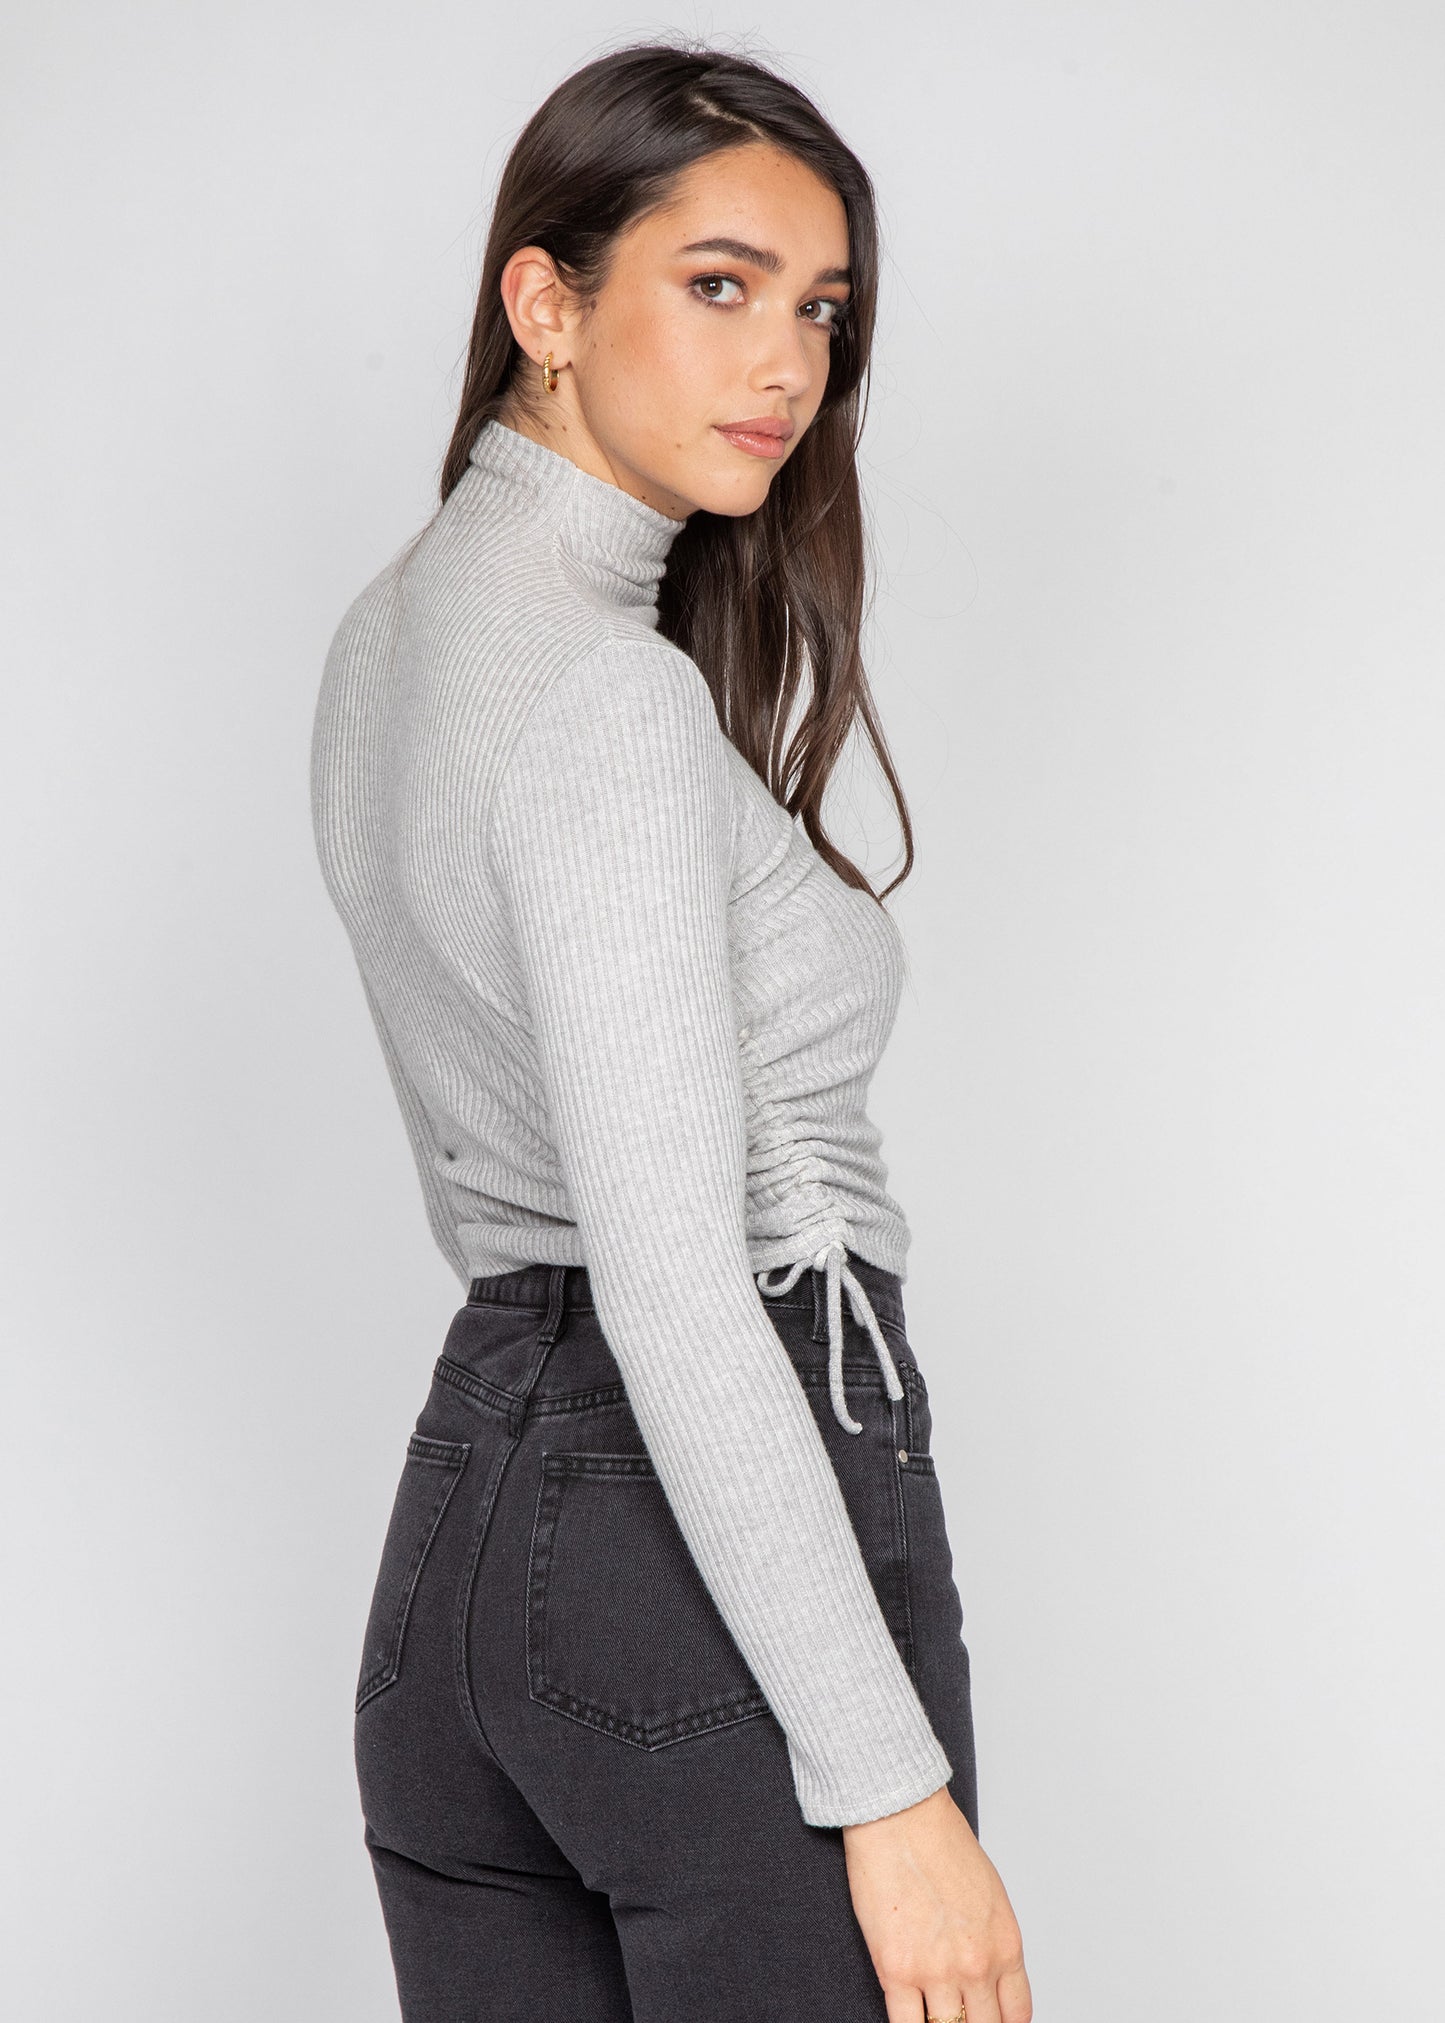 High neck jumper with ruched side detail in grey